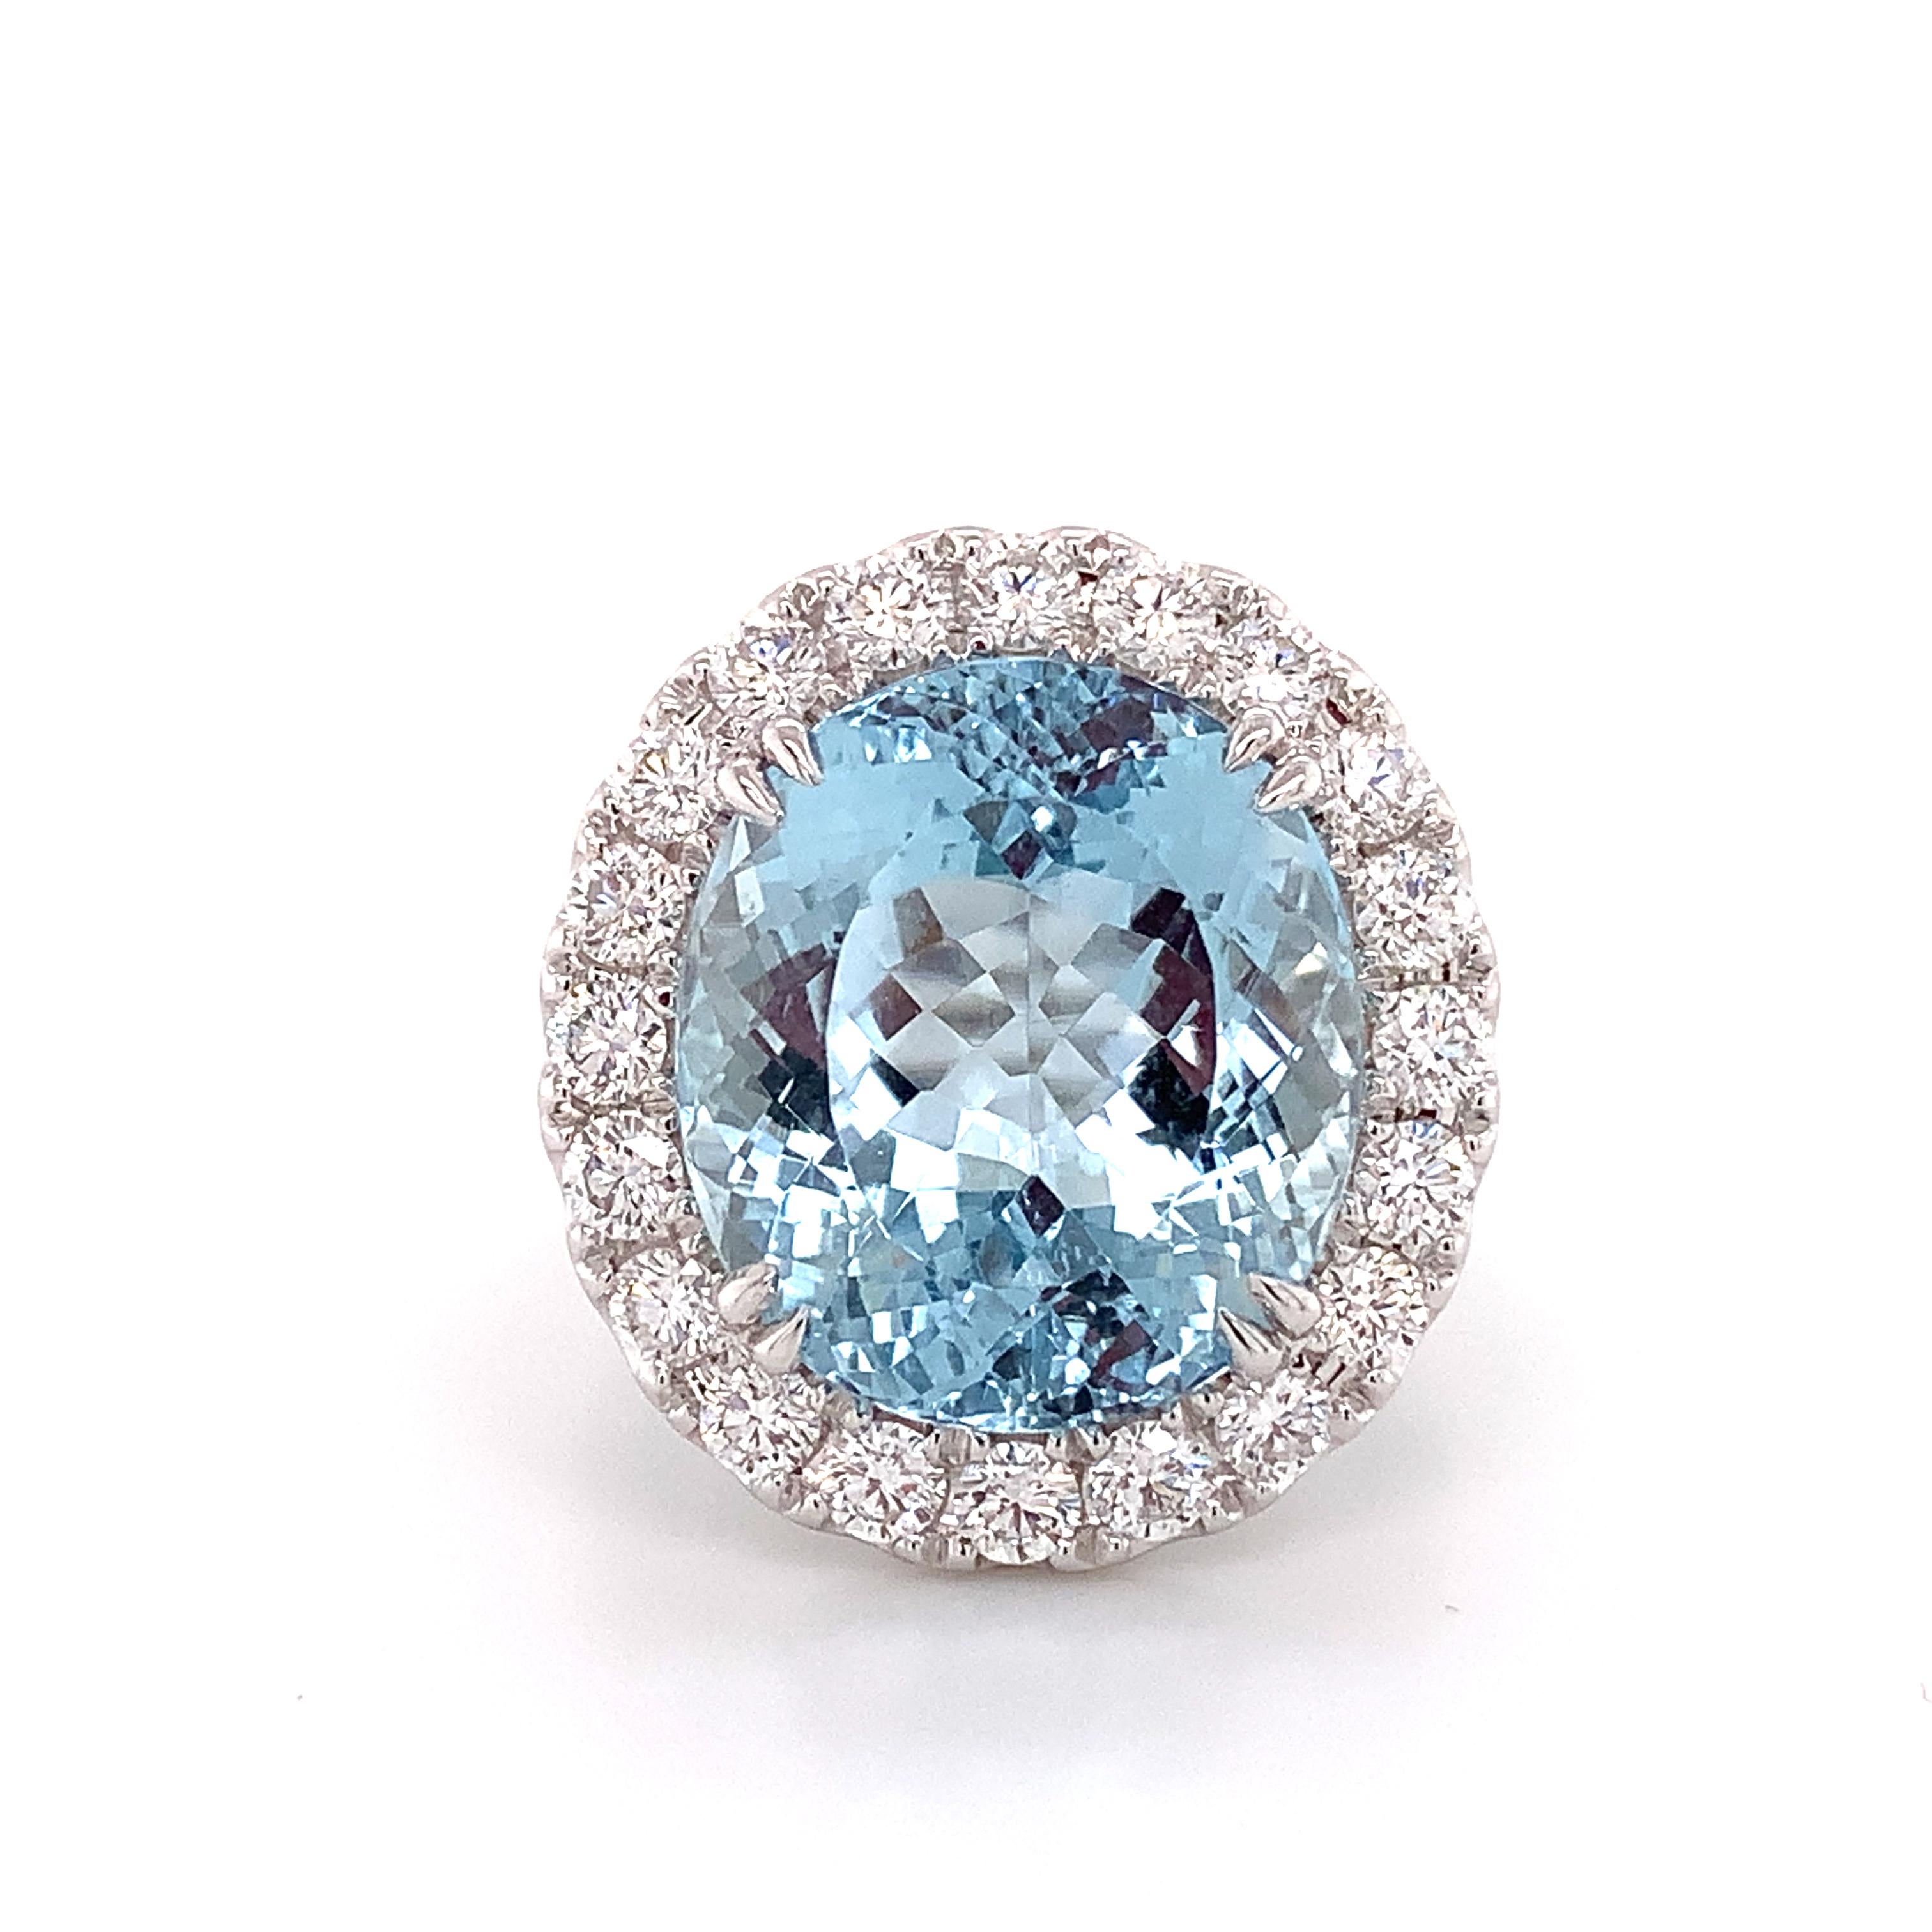 This Spectacular 12.51carat aquamarine & diamond cocktail statement ring will be the envy of all your friends! Crafted from stunning diamonds and a vibrant aquamarine, this statement piece is sure to light up any room you enter. Dare to be dazzling